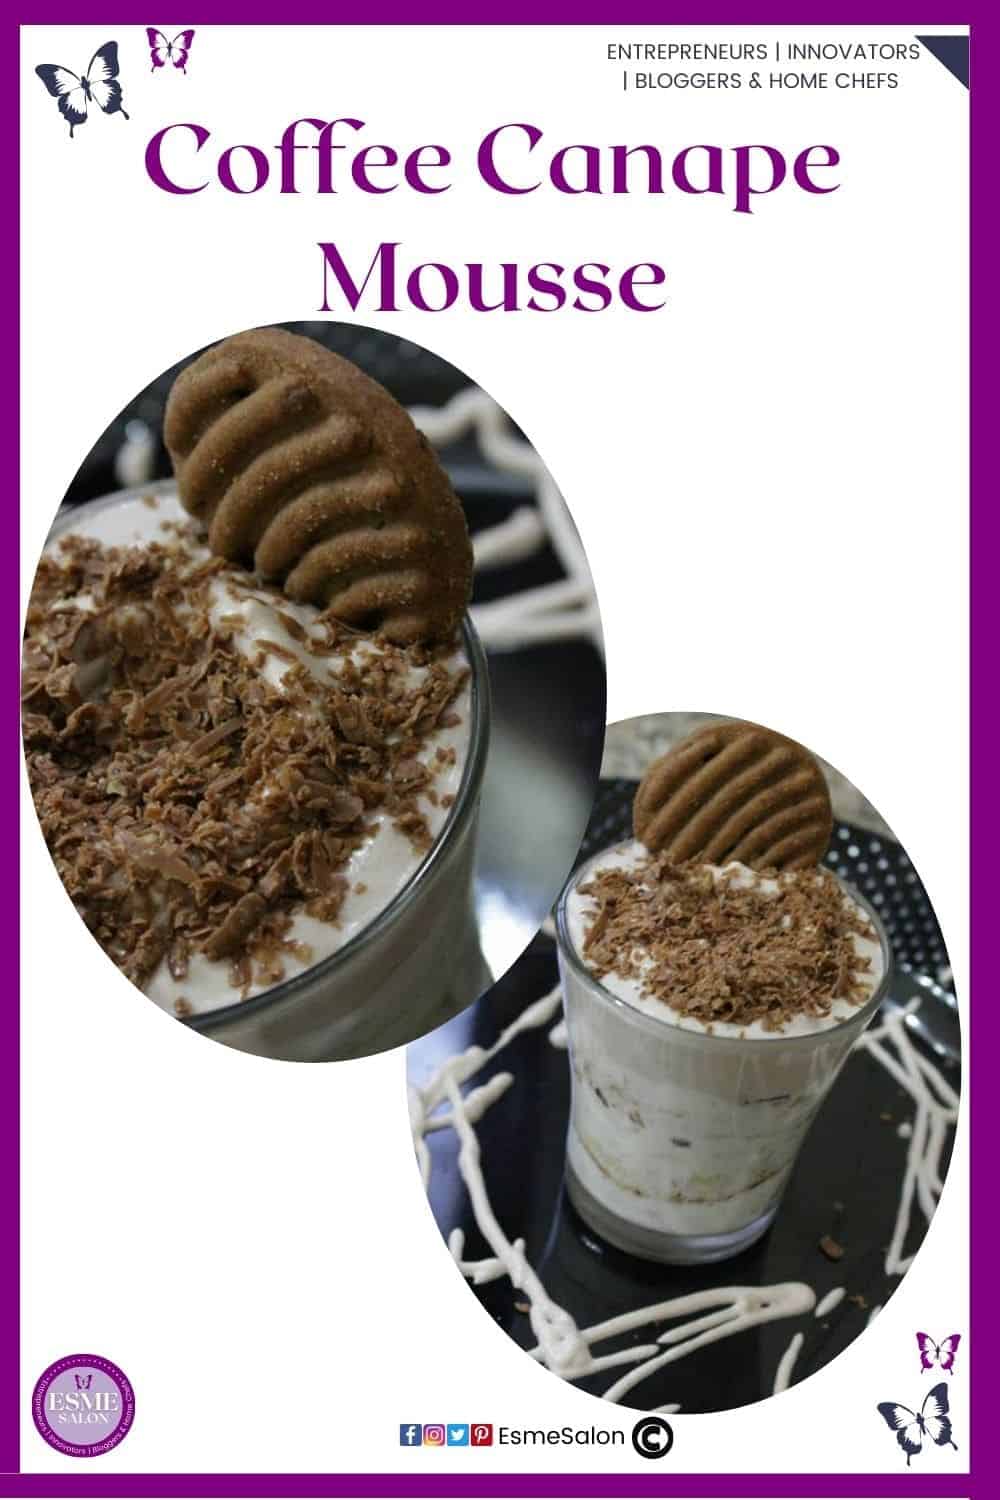 image of mousse in glass with chocolate cookies